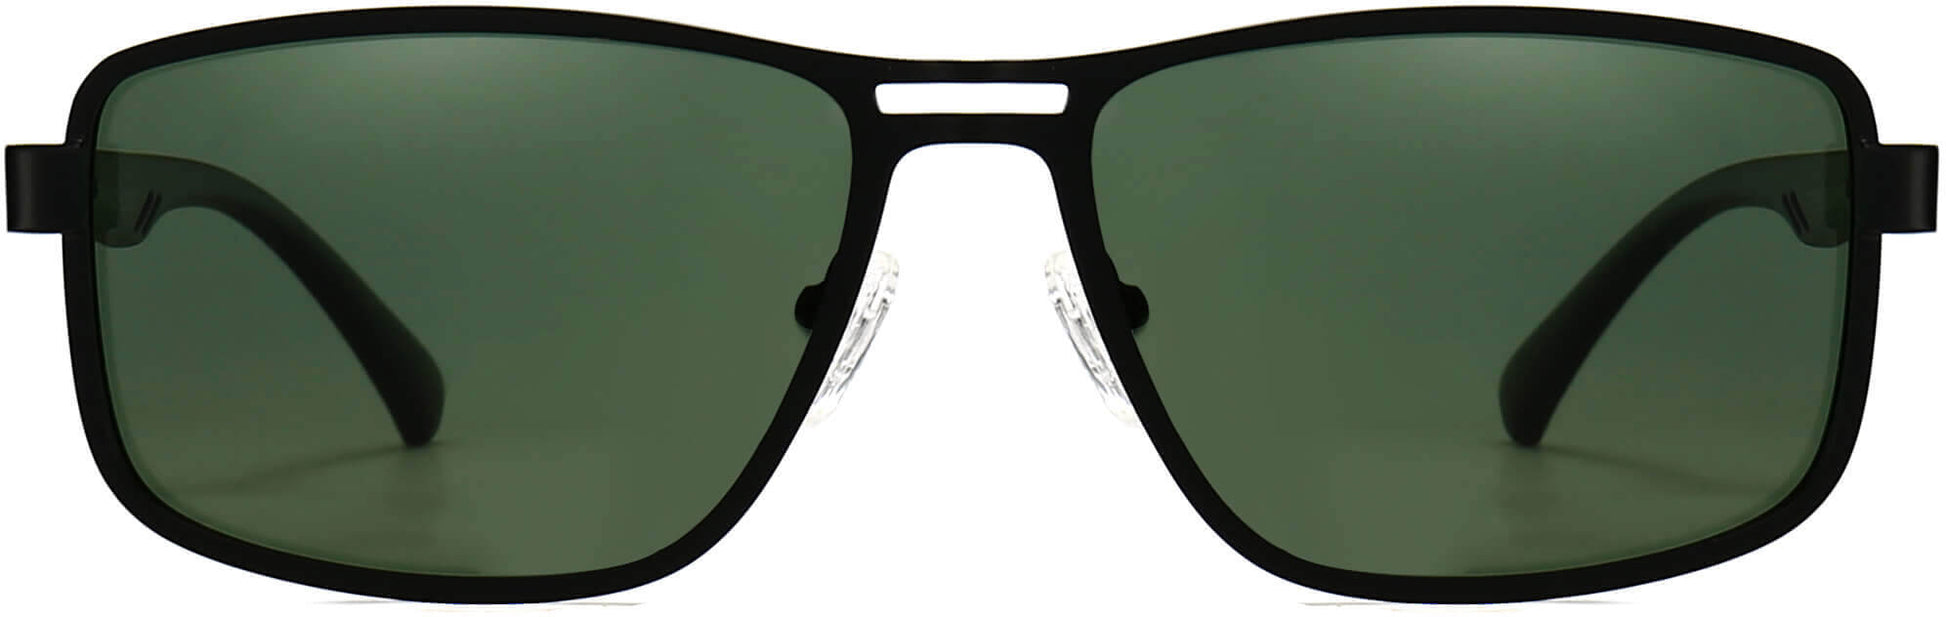 Adeline Black Stainless steel Sunglasses from ANRRI, front view